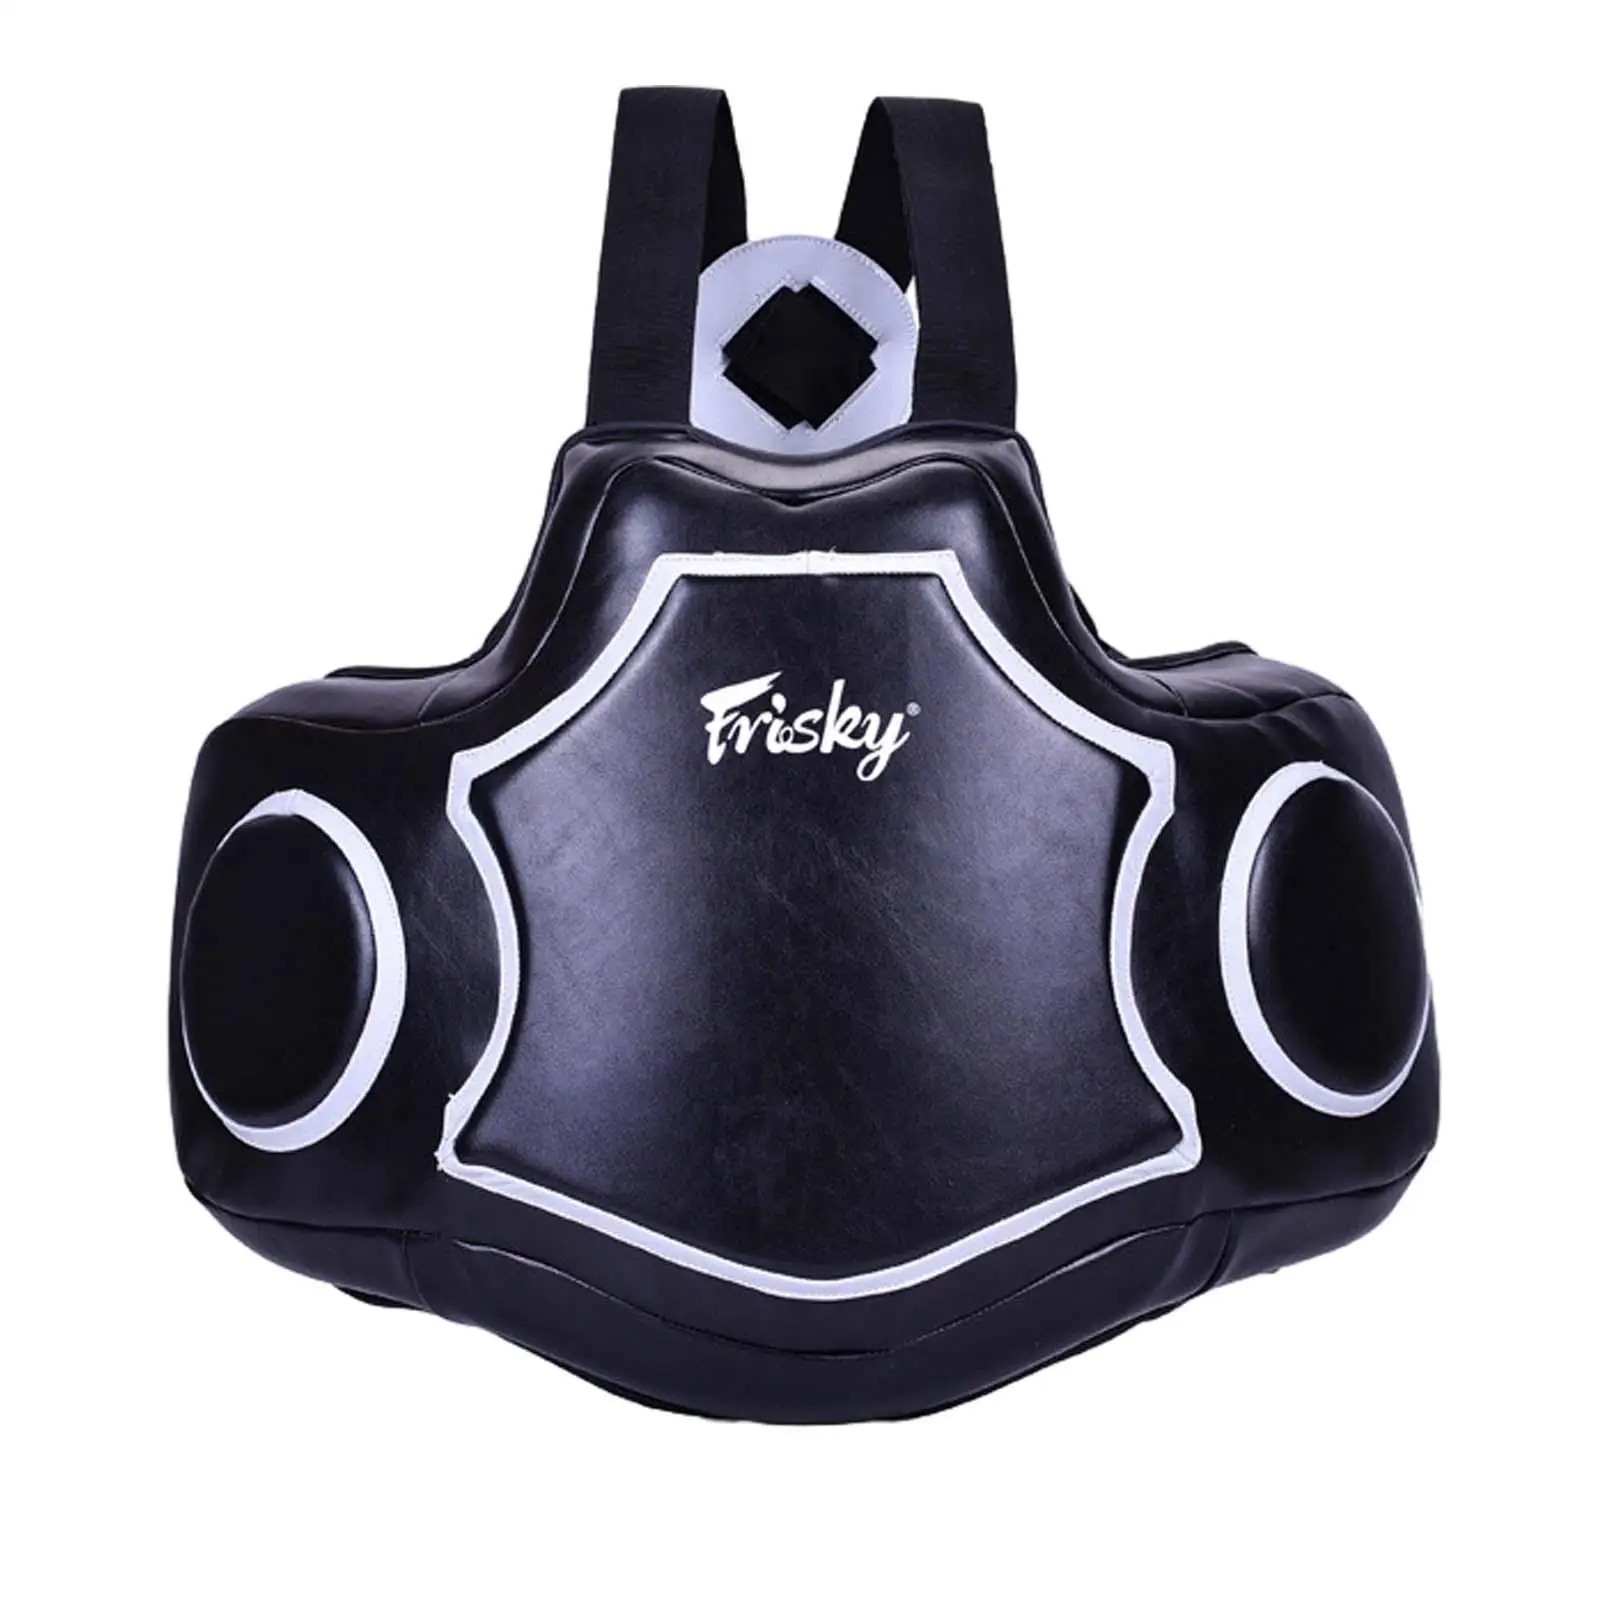 Boxing Body Protector Professional Body Guard for Sparring Kickboxing Sanda